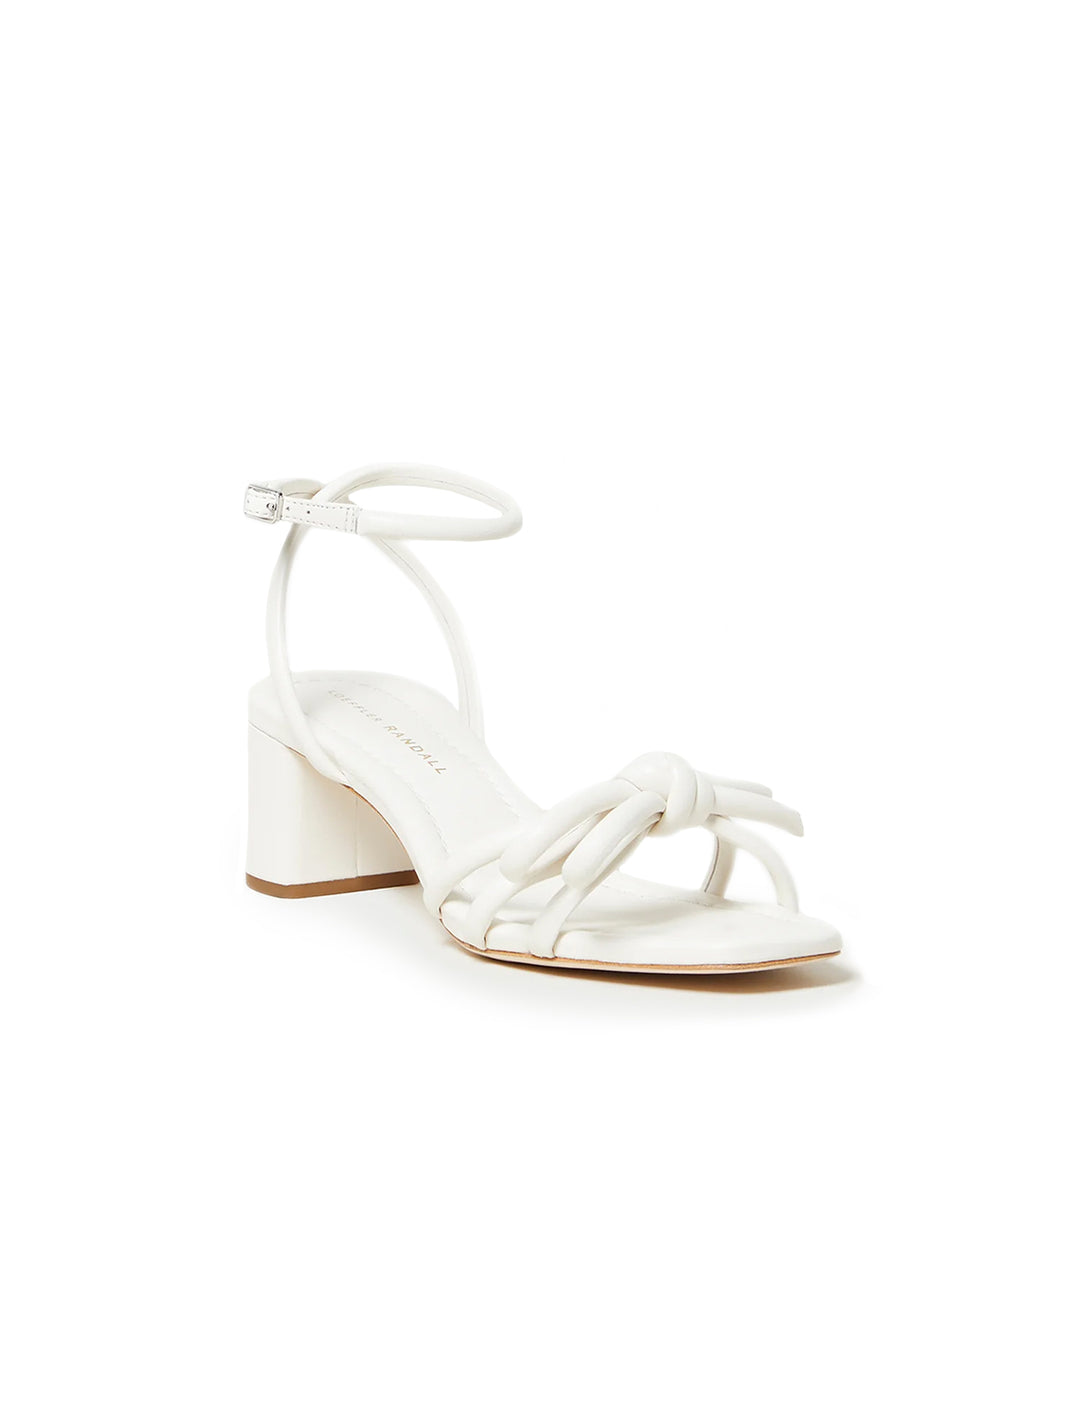 Front angle view of Loeffler Randall's leather bow mid heel sandal in white.